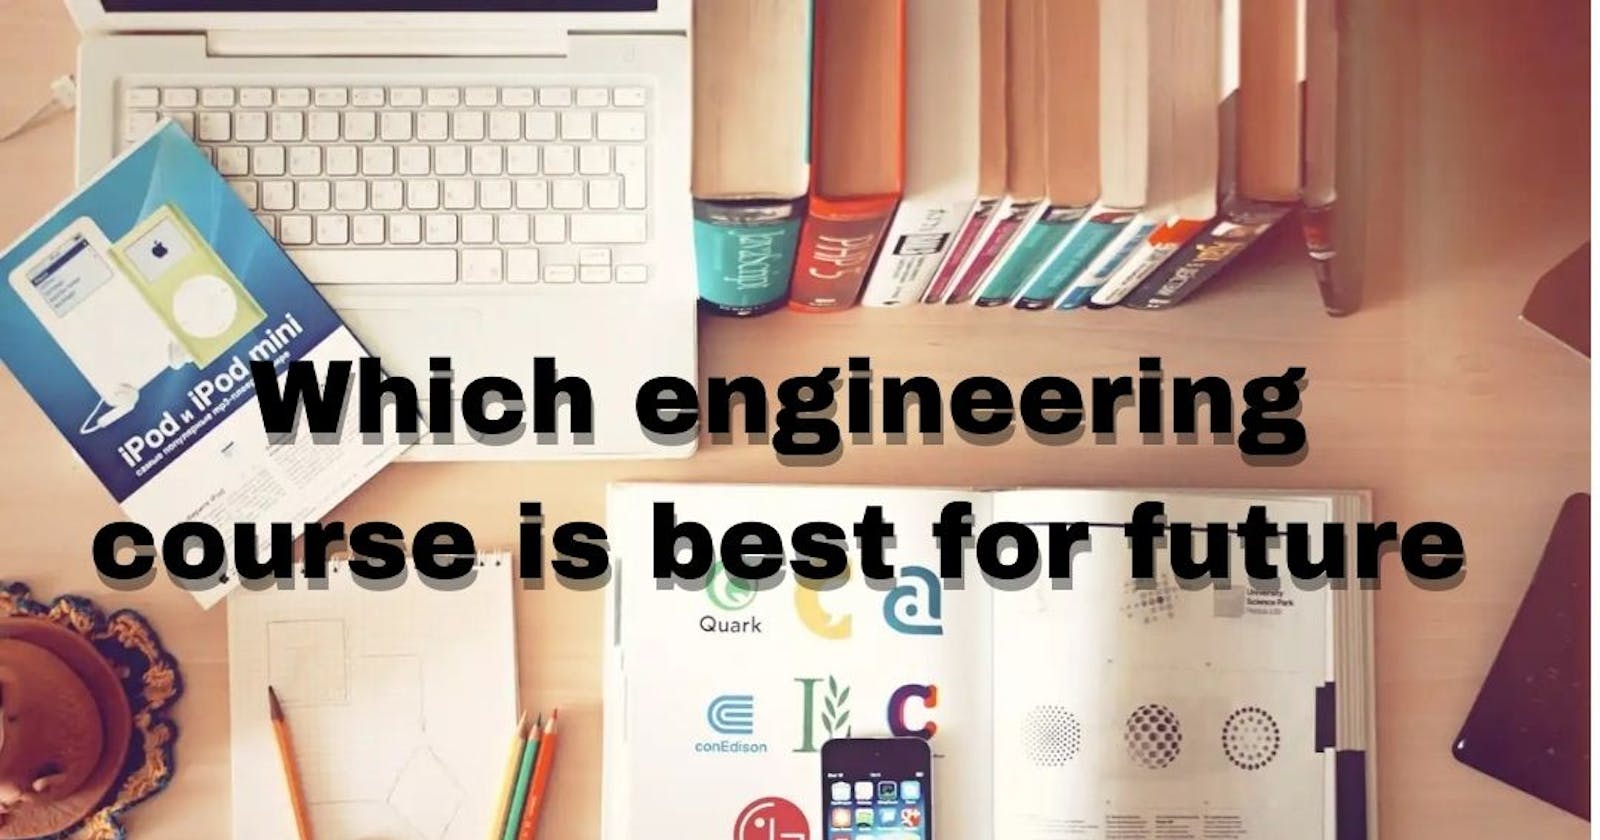 Which engineering course is best for future